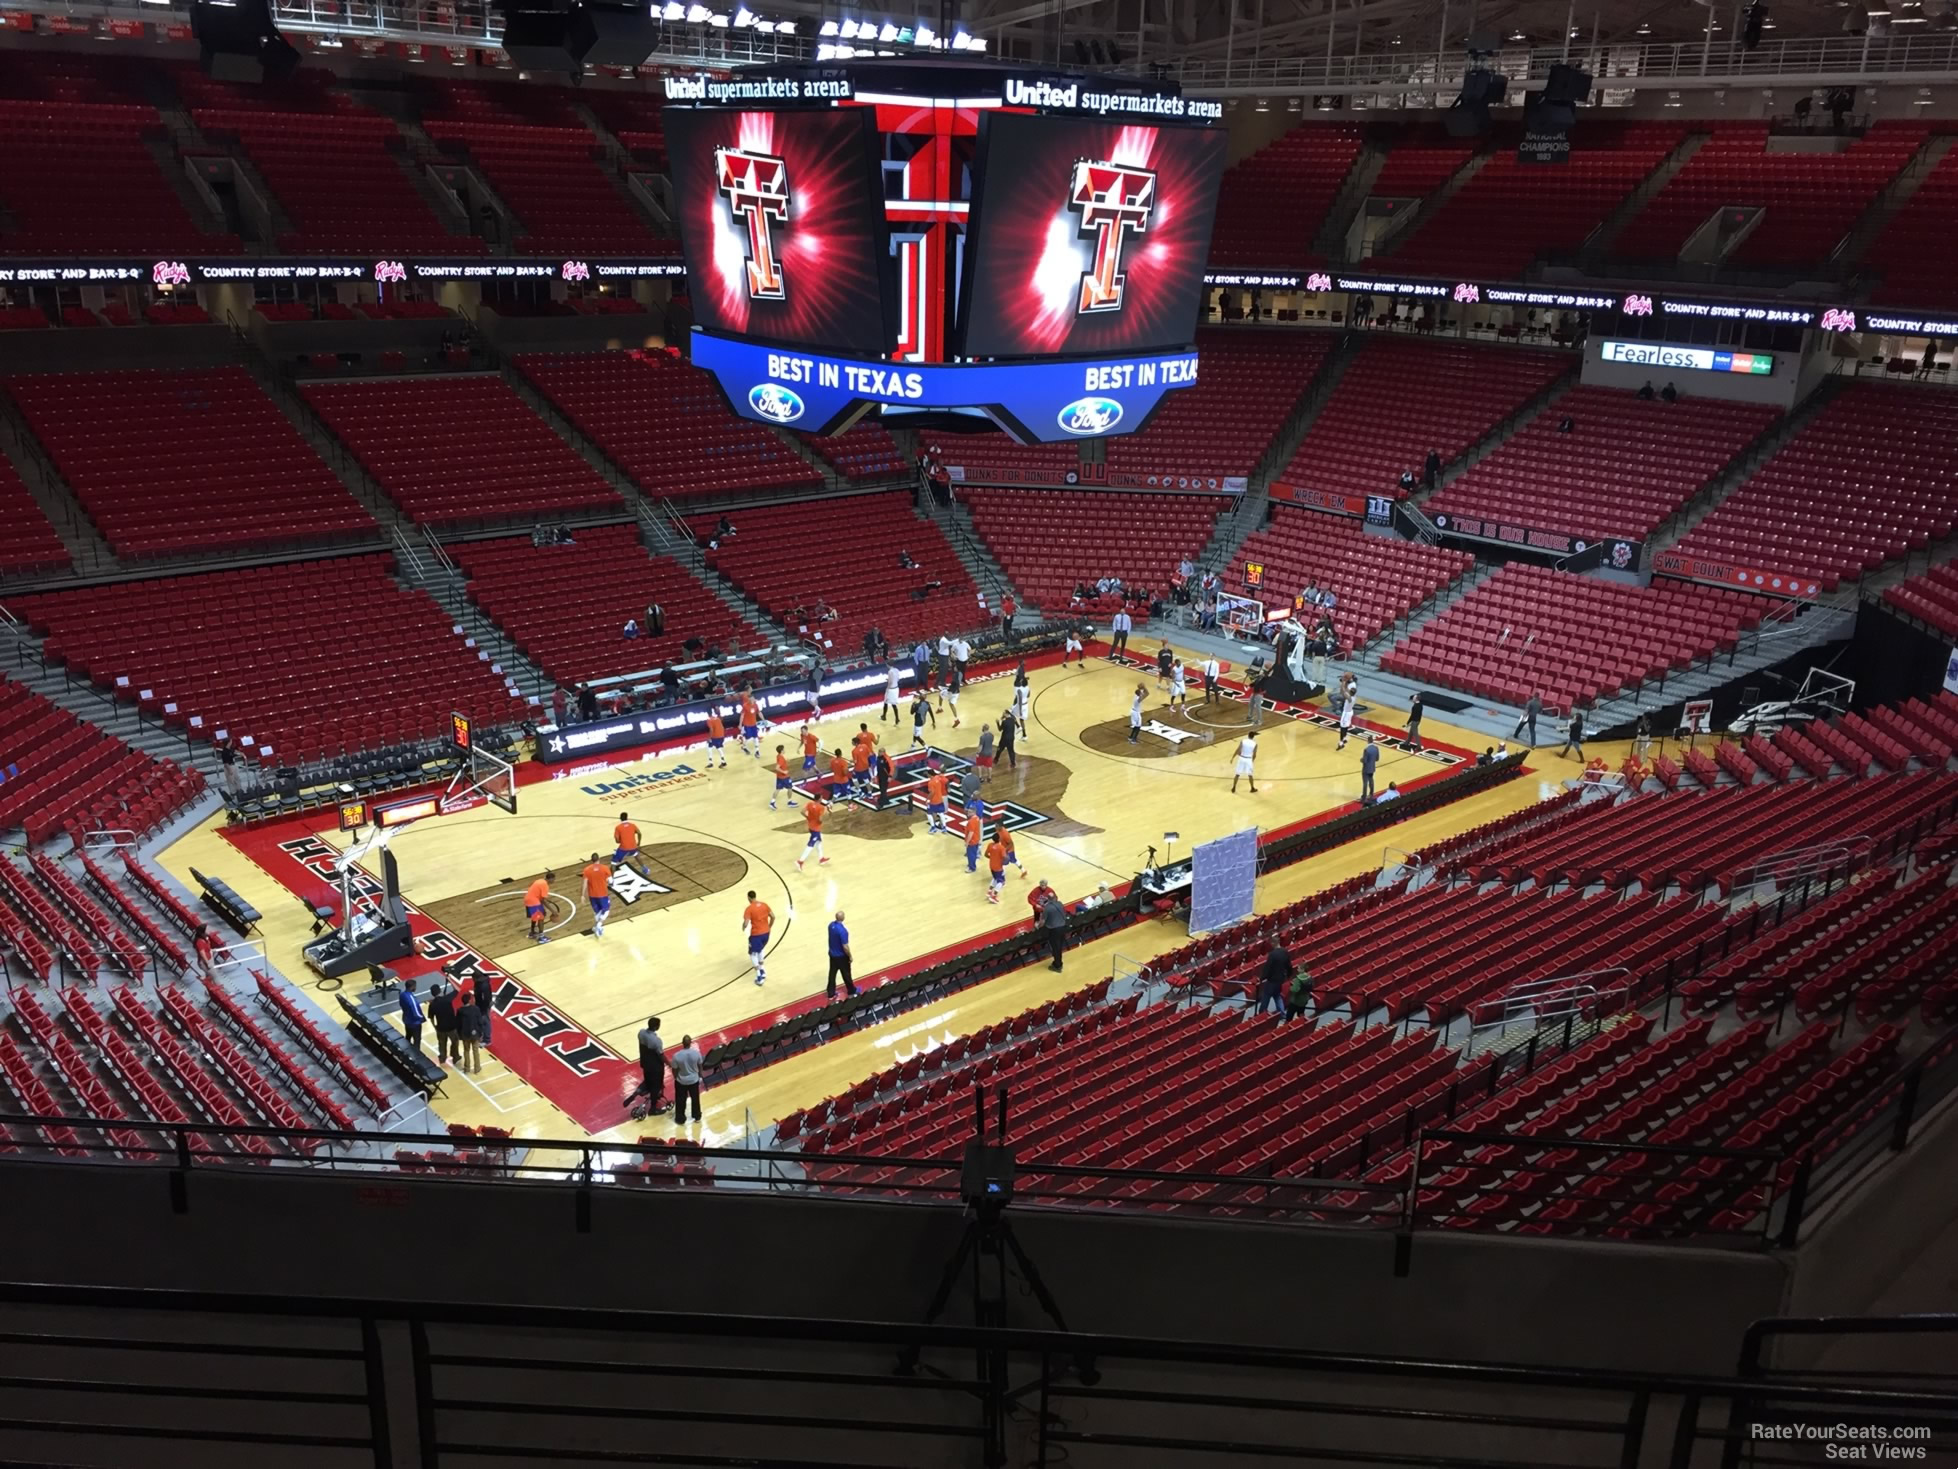 section 204, row 7 seat view  - united supermarkets arena